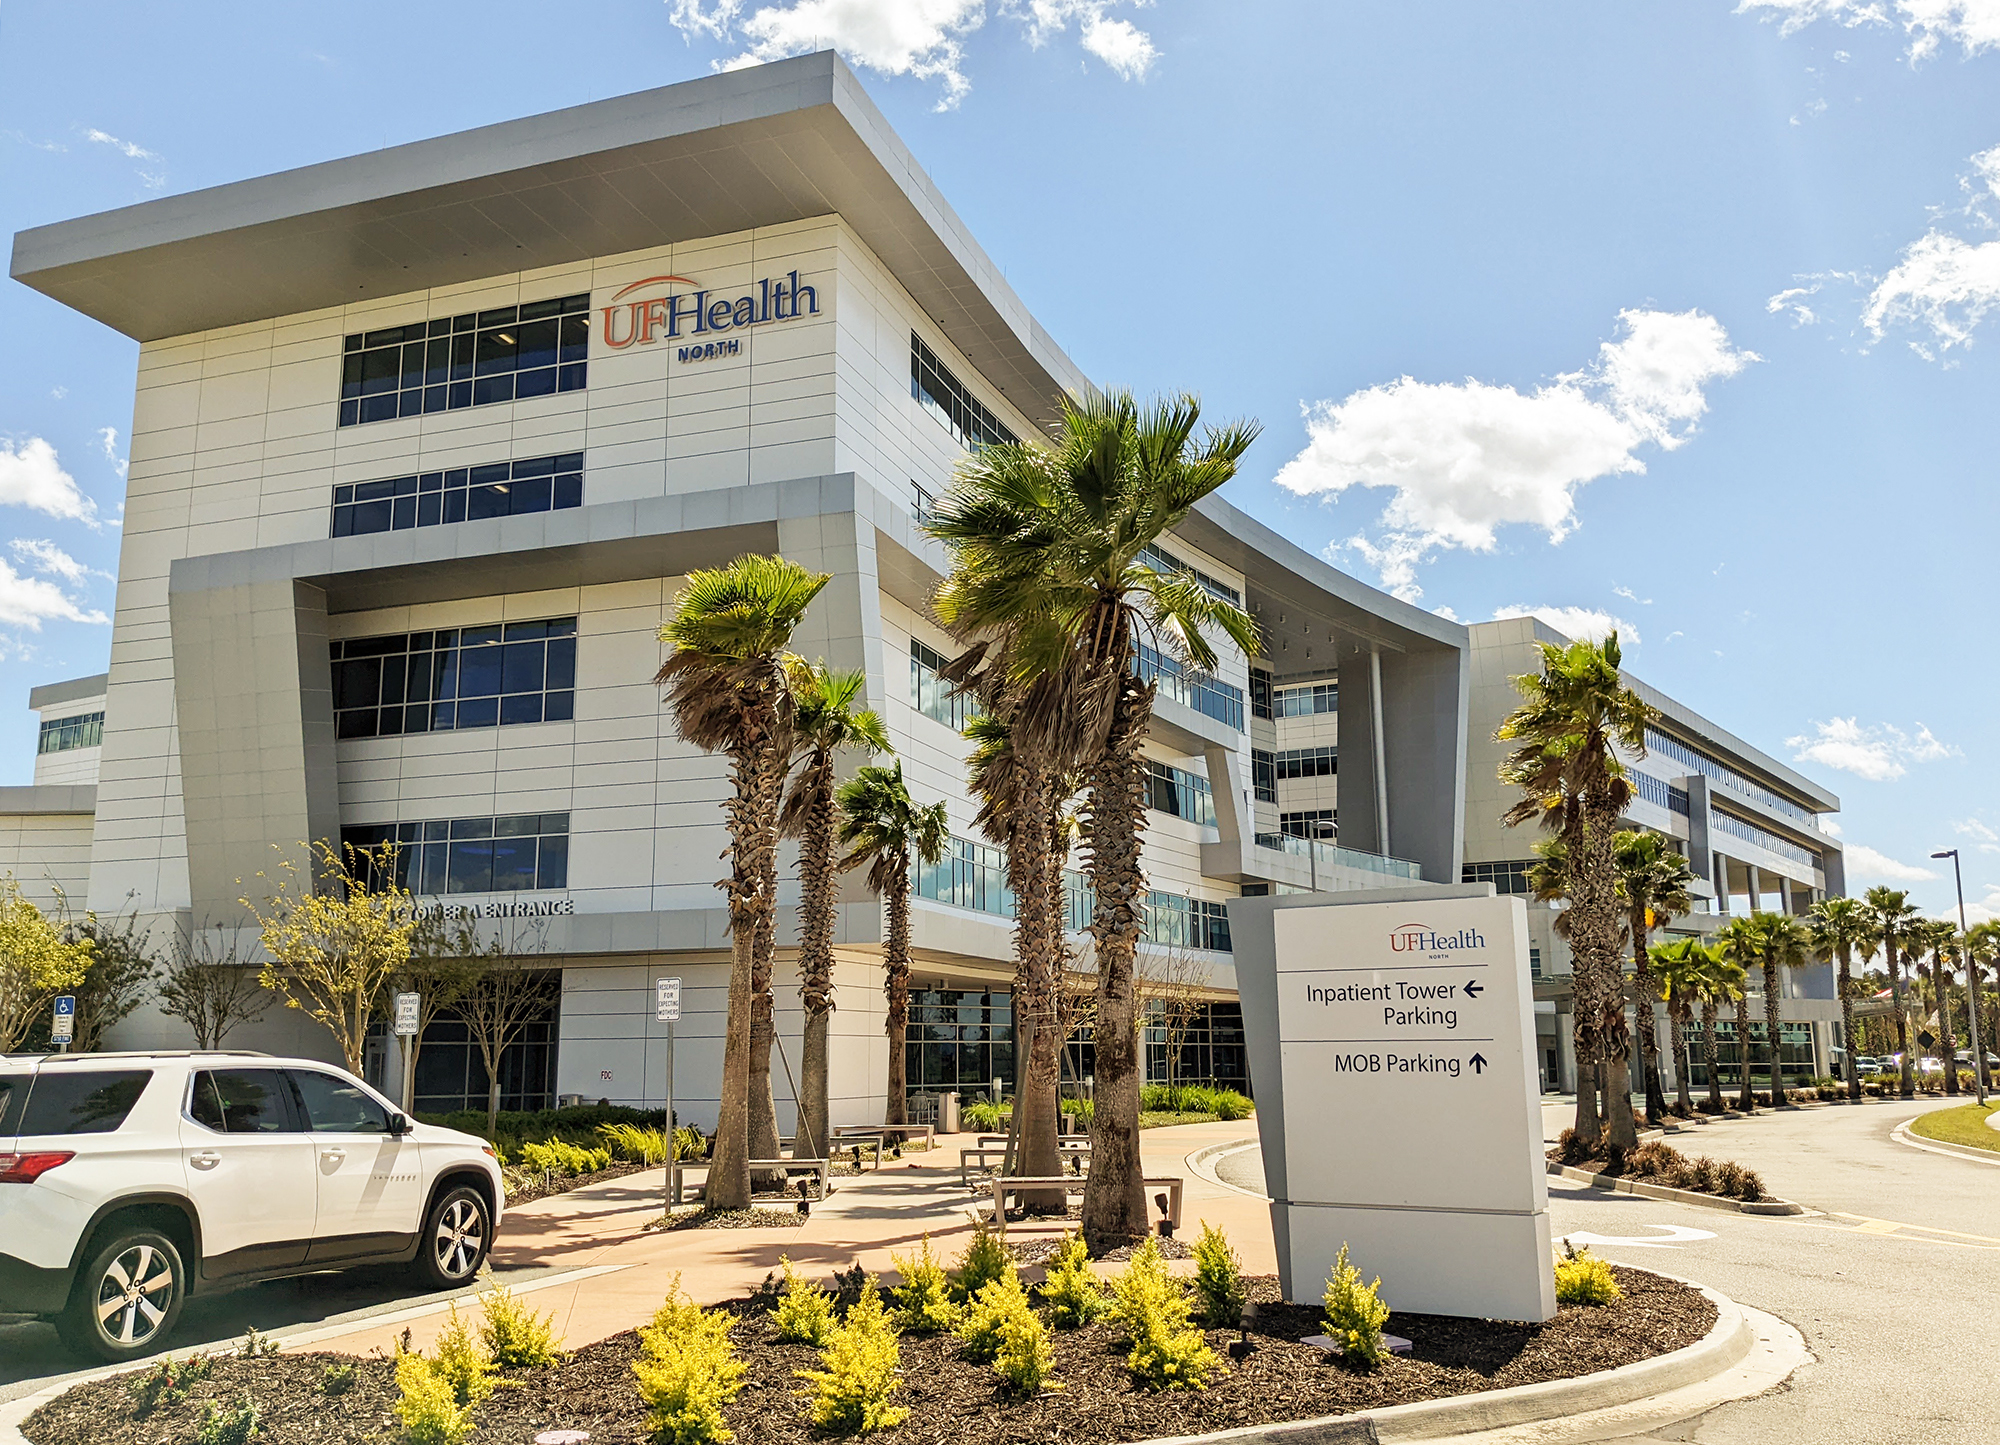 UF Health North opened the first phase of the campus in 2015 and the second in 2017.